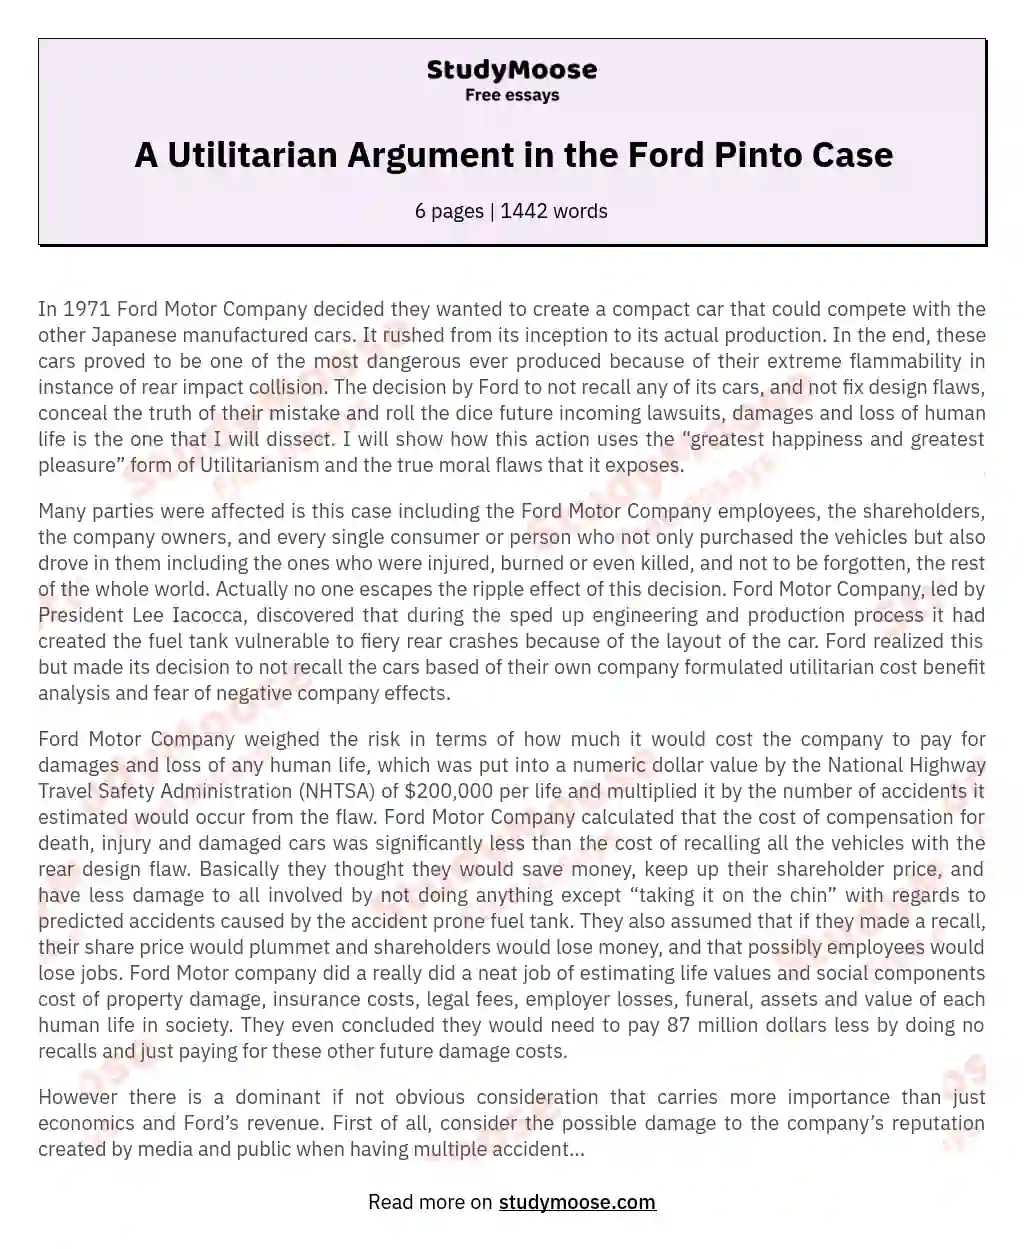 A Utilitarian Argument in the Ford Pinto Case essay